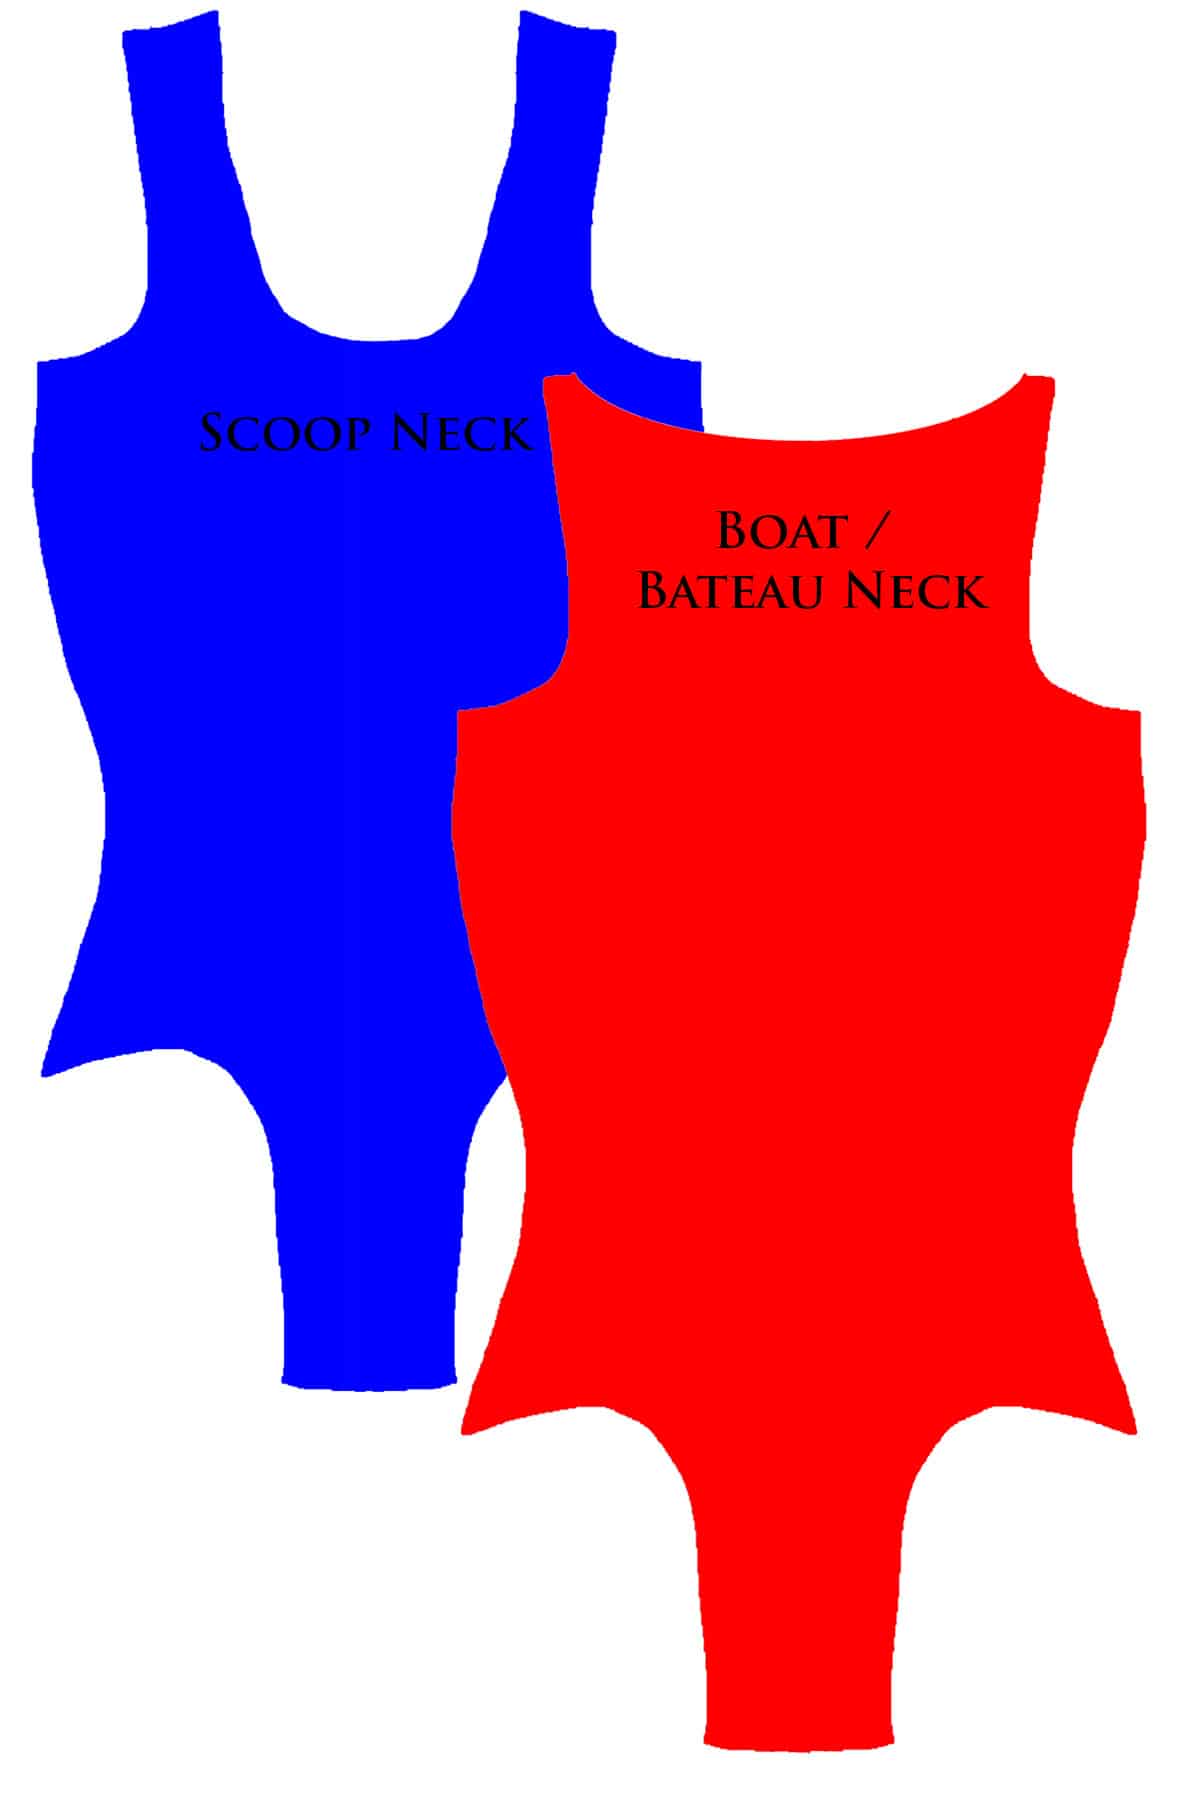 A diagram showing a scoop neck design in blue, and a boat neck design in red.